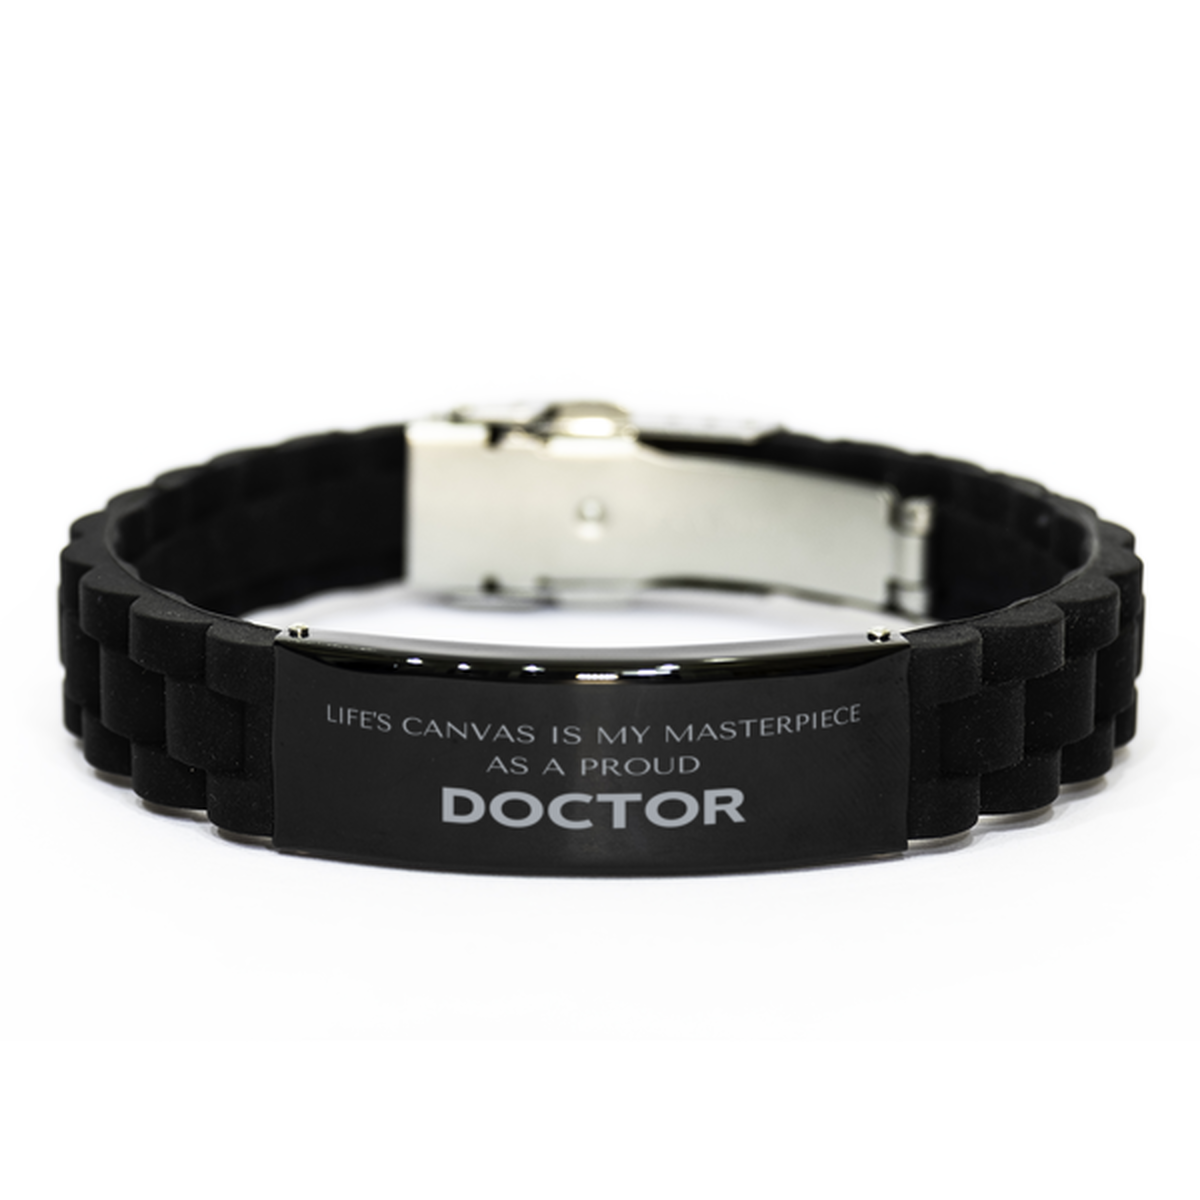 Proud Doctor Gifts, Life's canvas is my masterpiece, Epic Birthday Christmas Unique Black Glidelock Clasp Bracelet For Doctor, Coworkers, Men, Women, Friends